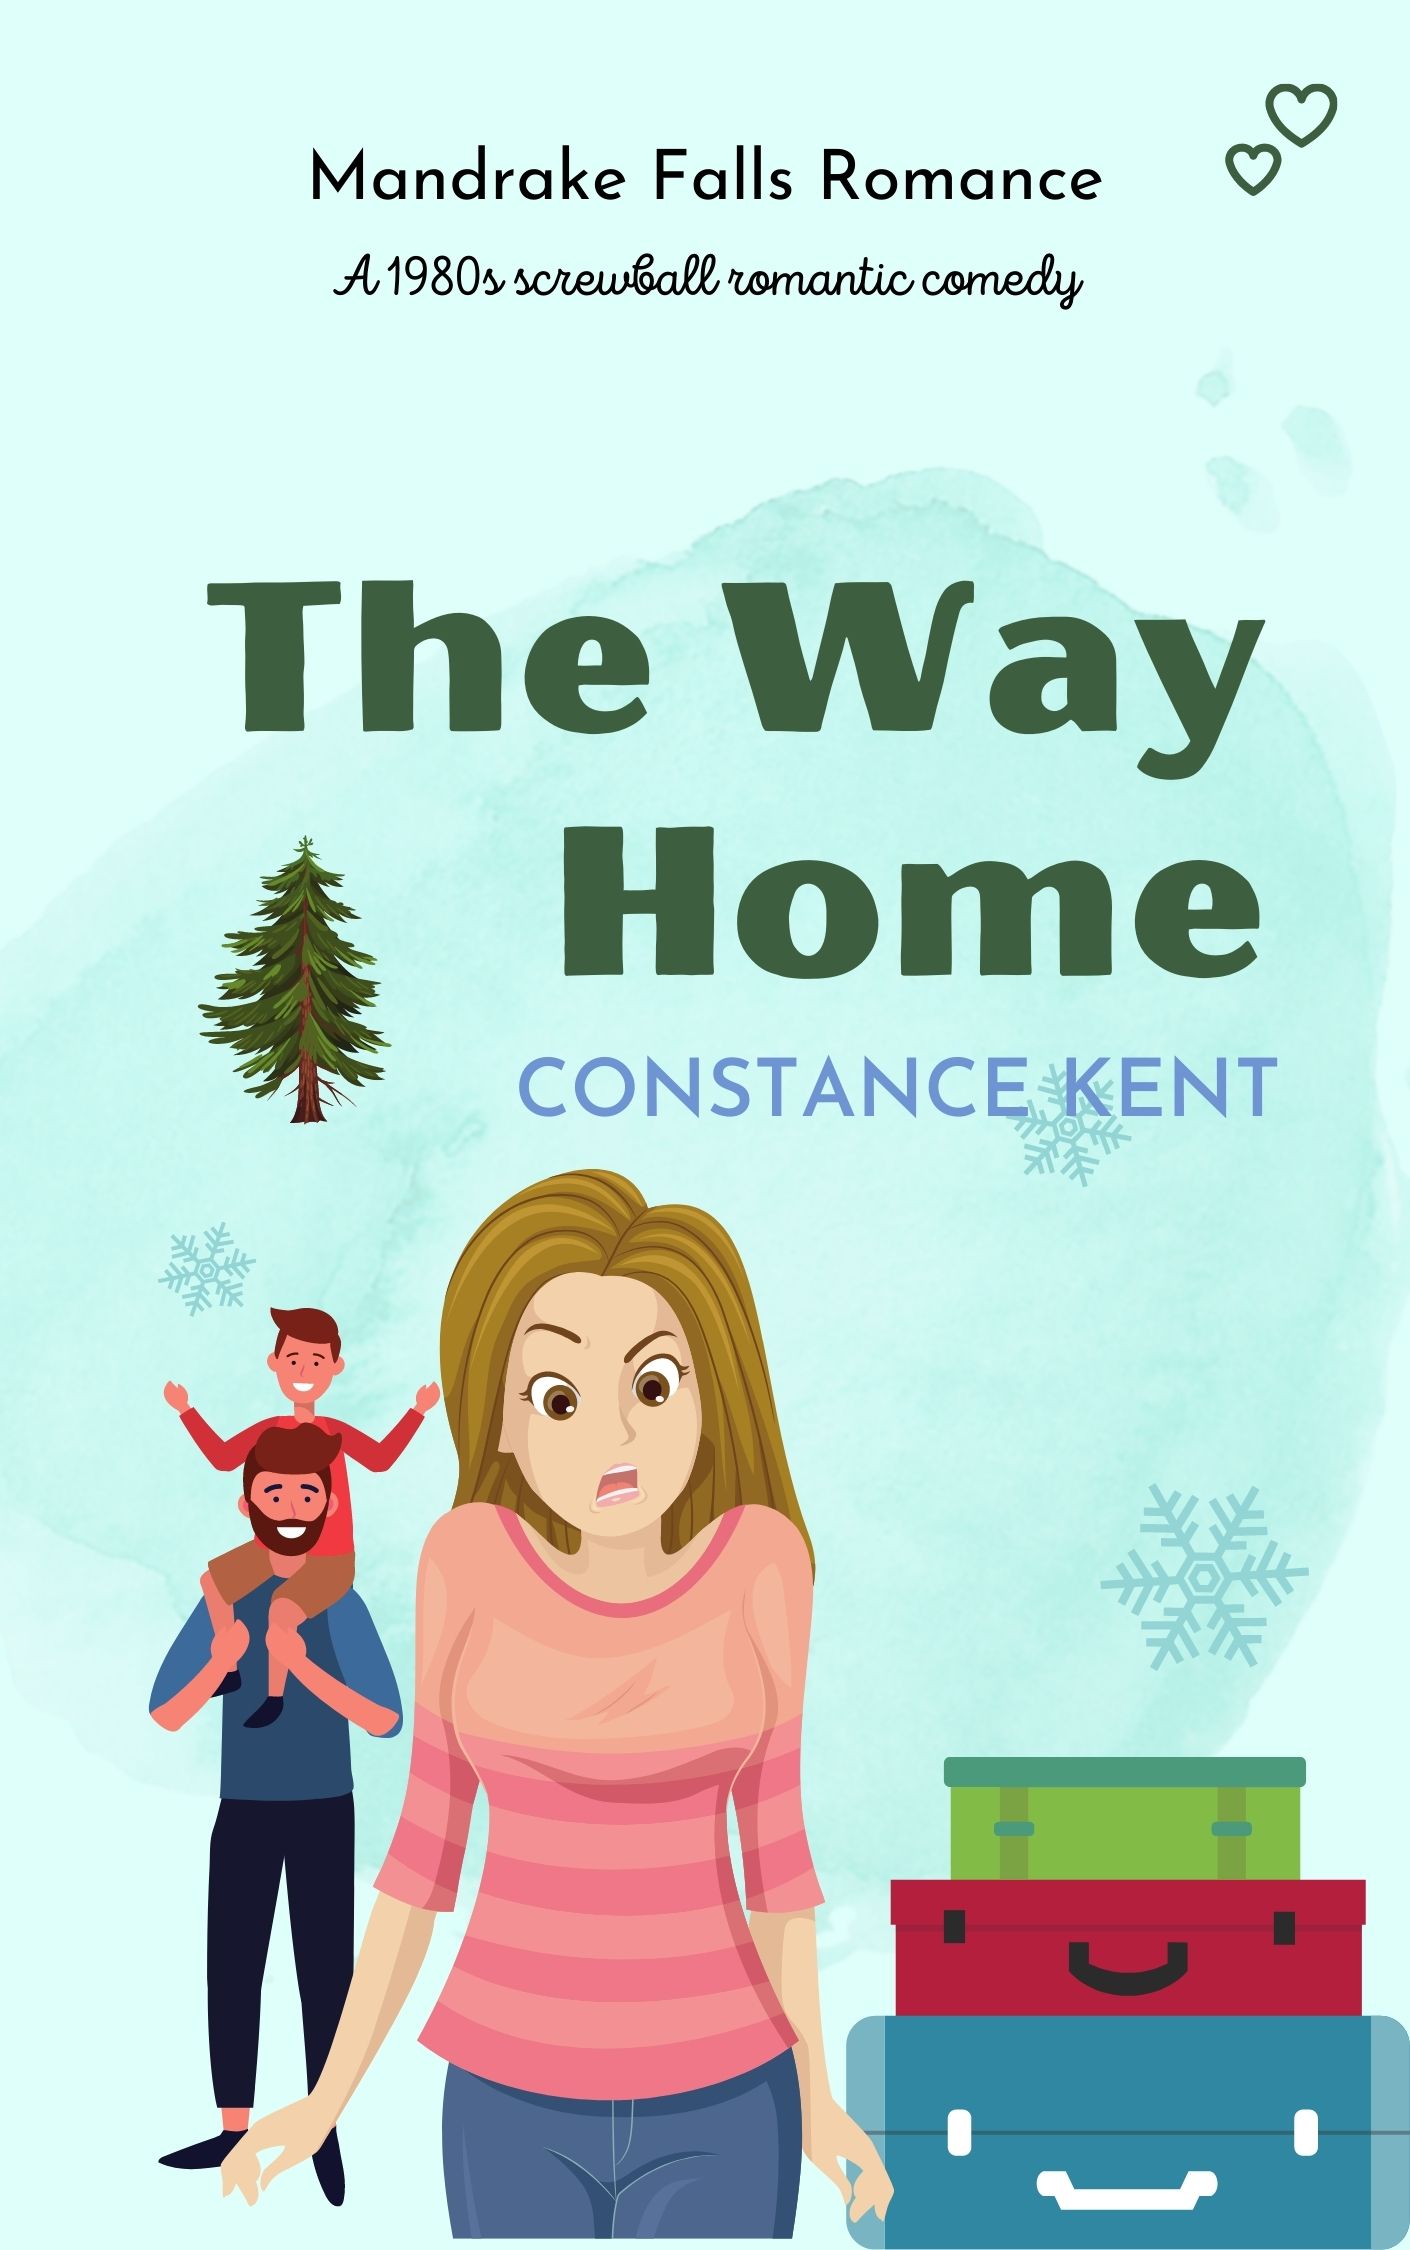 The Way Home Romantic Comedy series book three